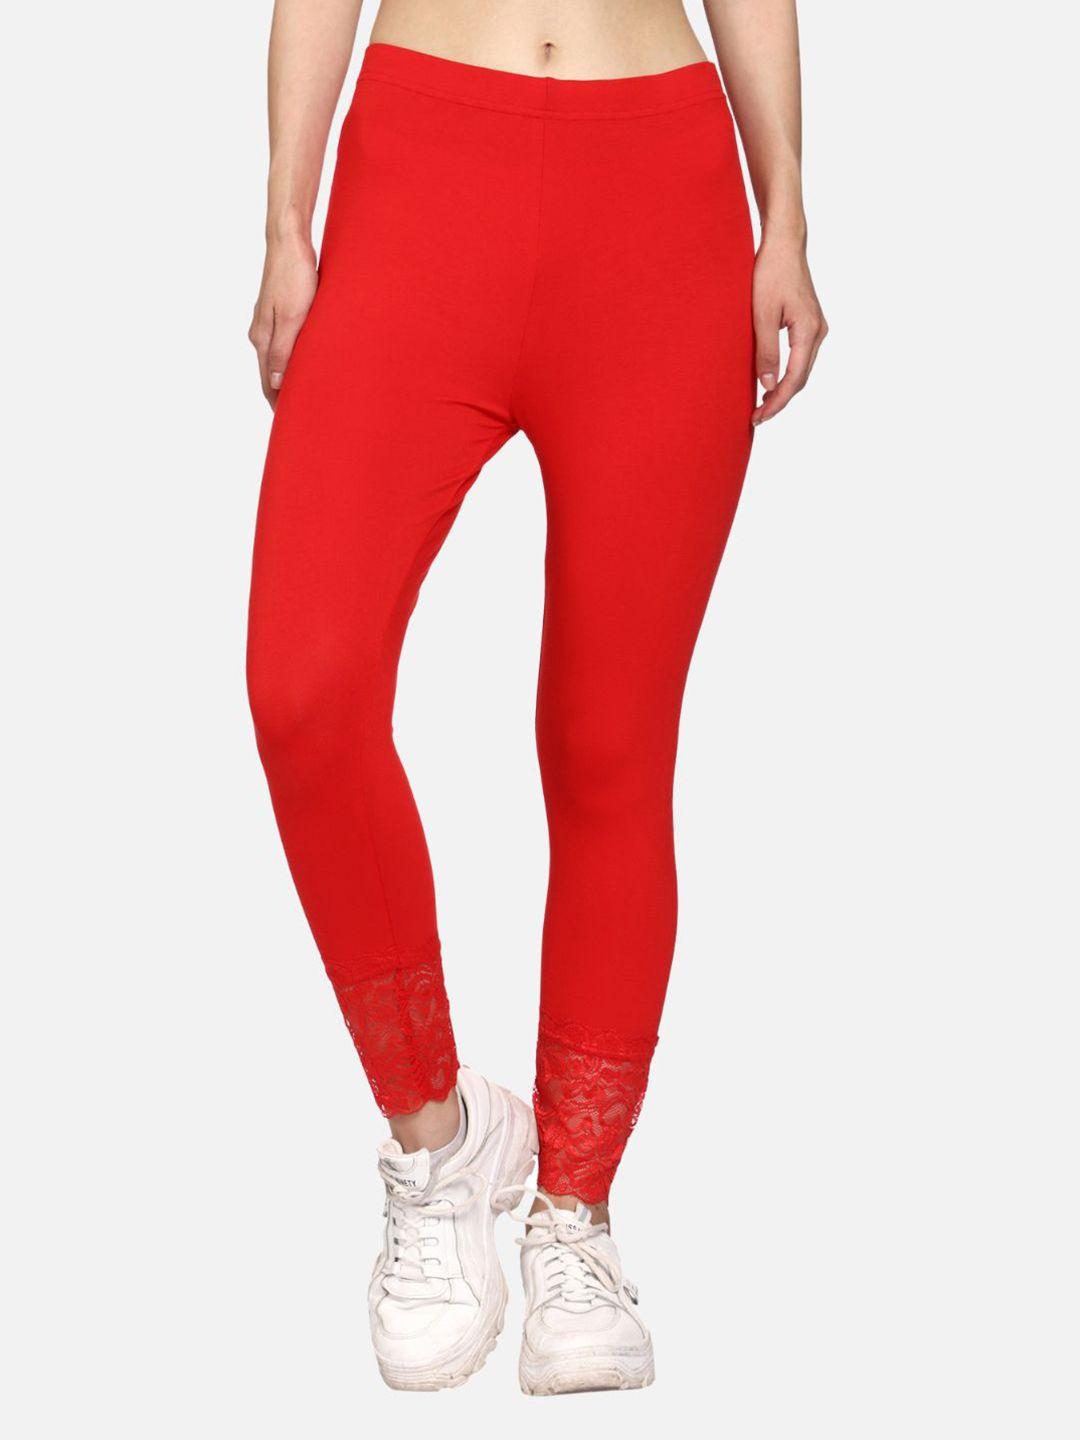 outflits women red solid leggings